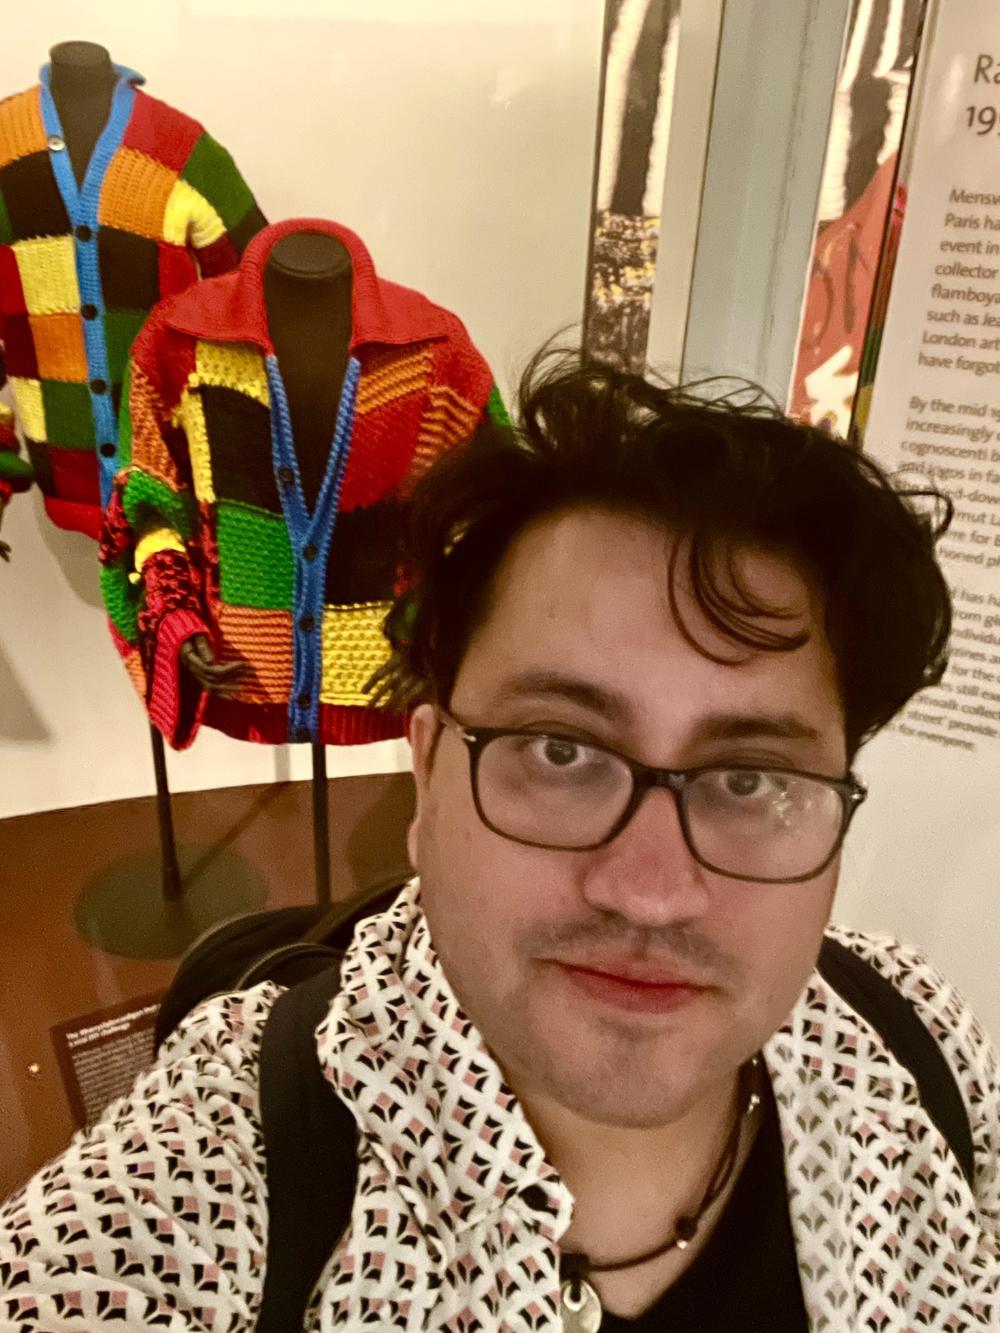 Valencia poses for a selfie at London's Victoria and Albert museum in London, where an exhibit featured the colorful Styles cardigan that inspired a craze during the pandemic.